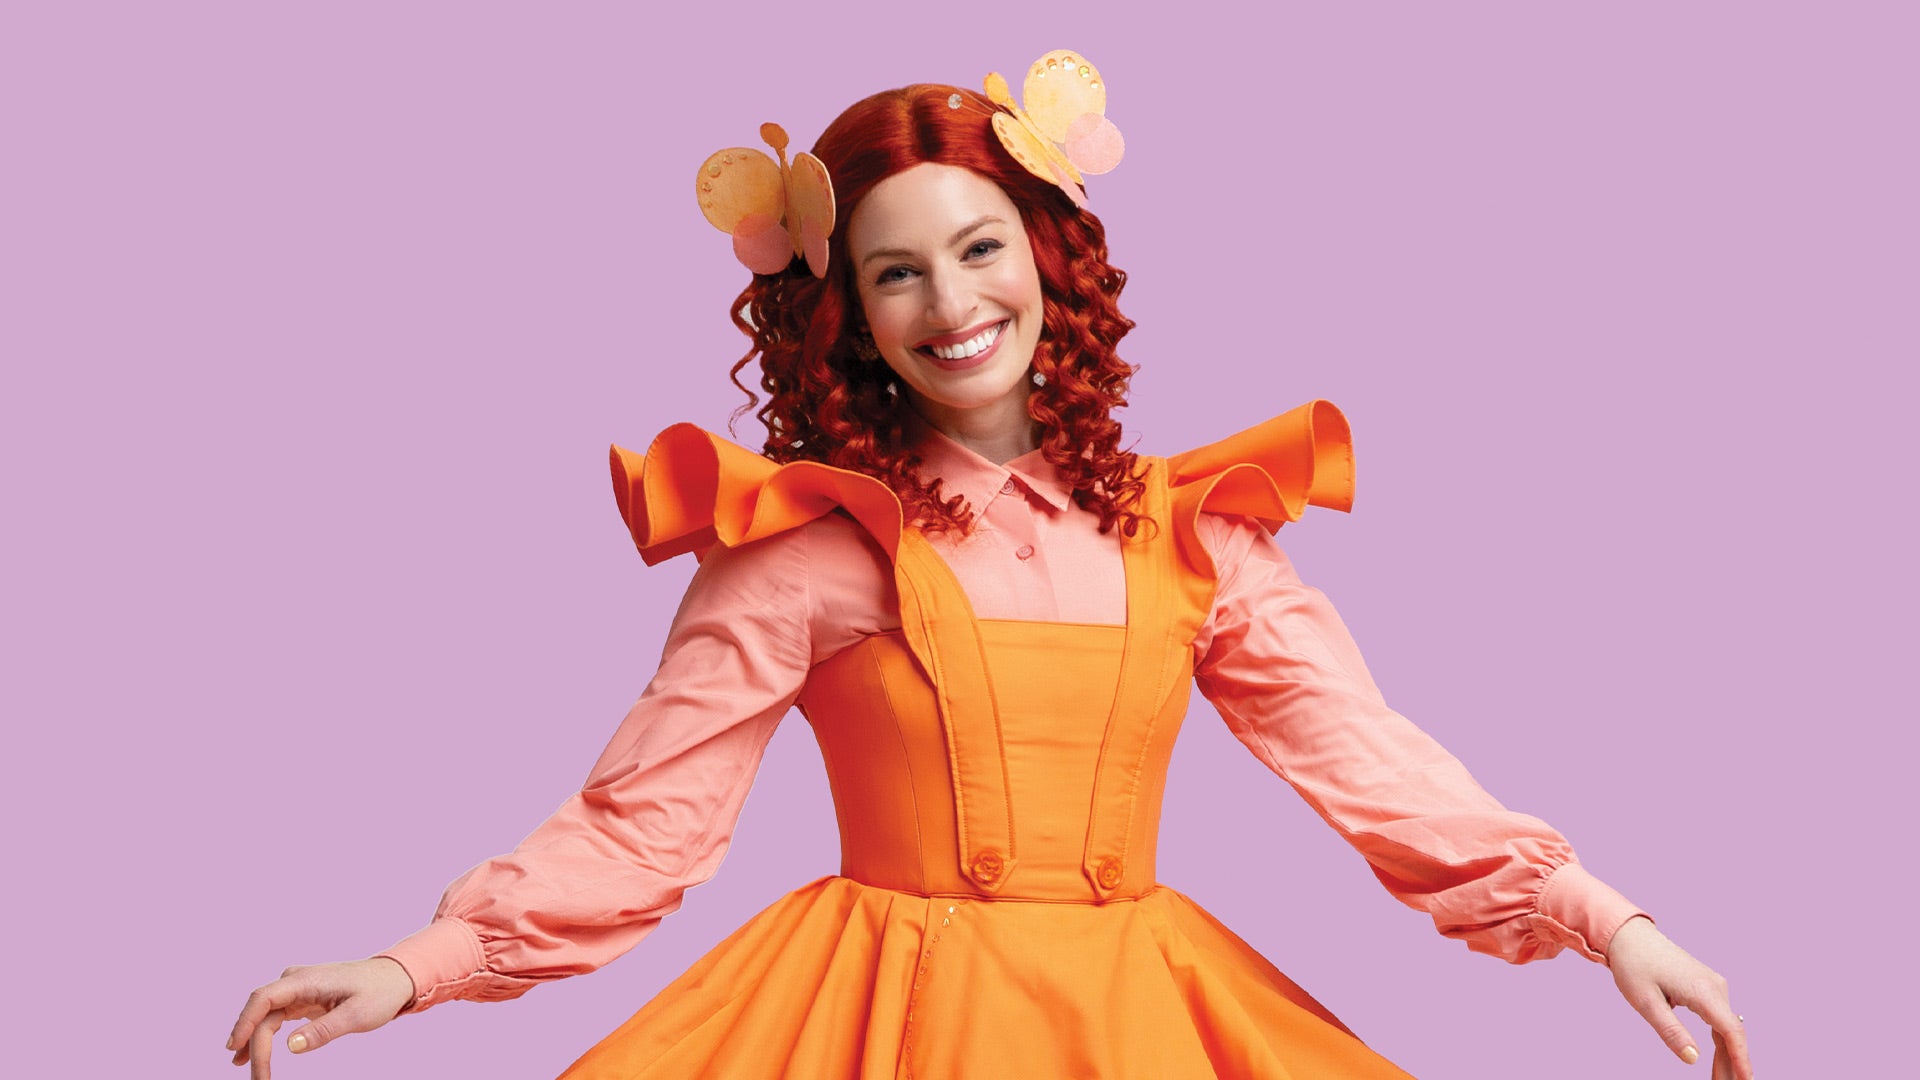 WIN 1 of 2 family passes to see Emma Memma’s Boop and Twirl Tour, PLUS merchandise!